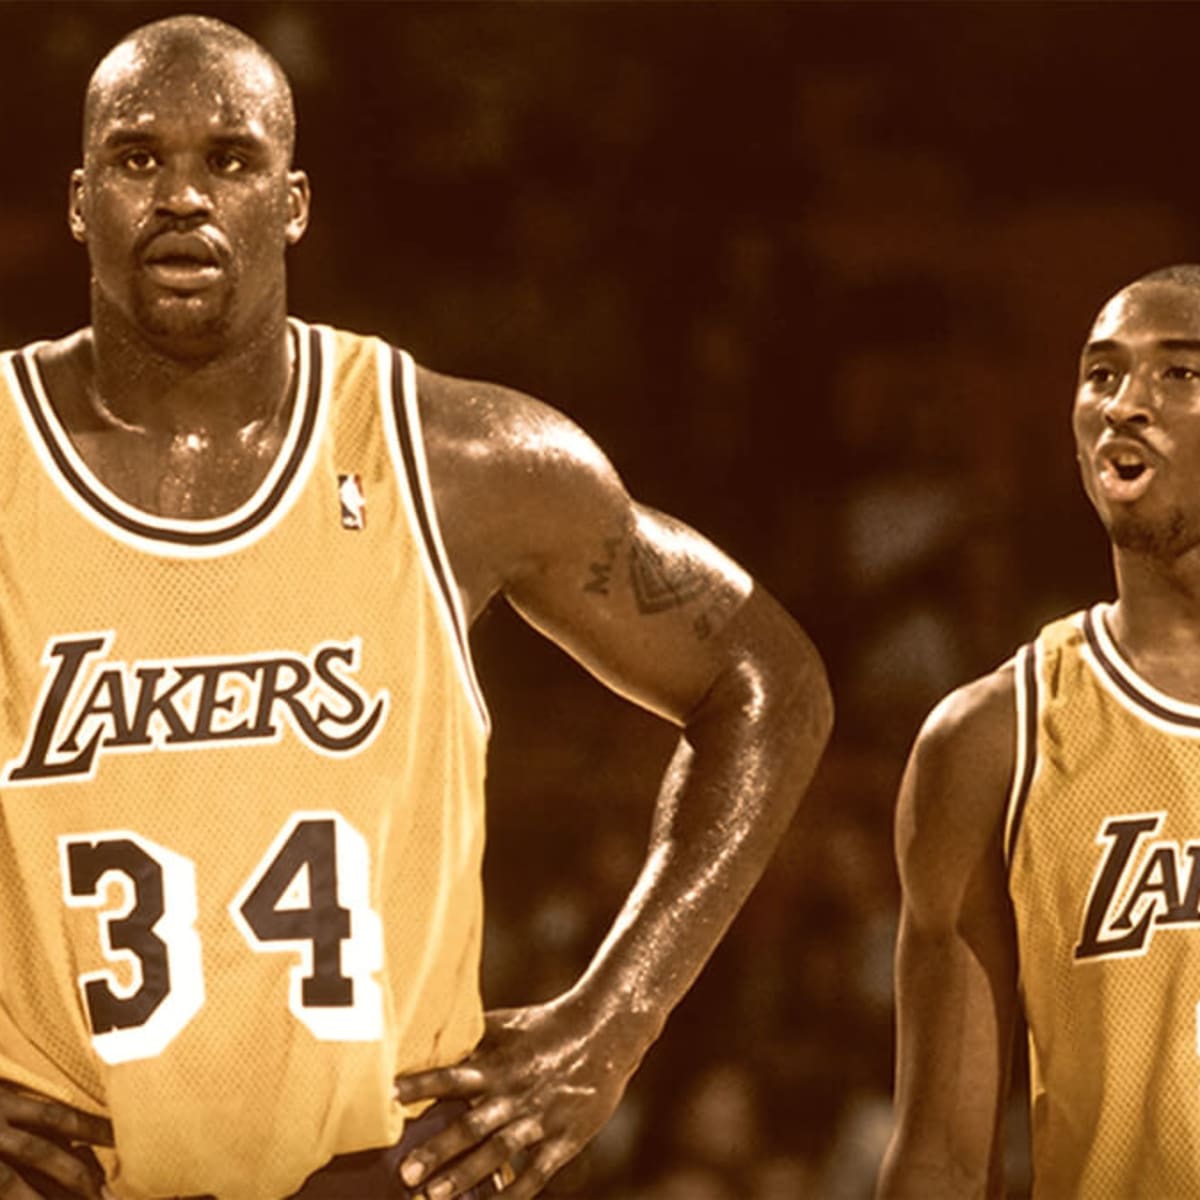 Isaiah Rider reveals Shaq once offered him $10,000 to fight Kobe